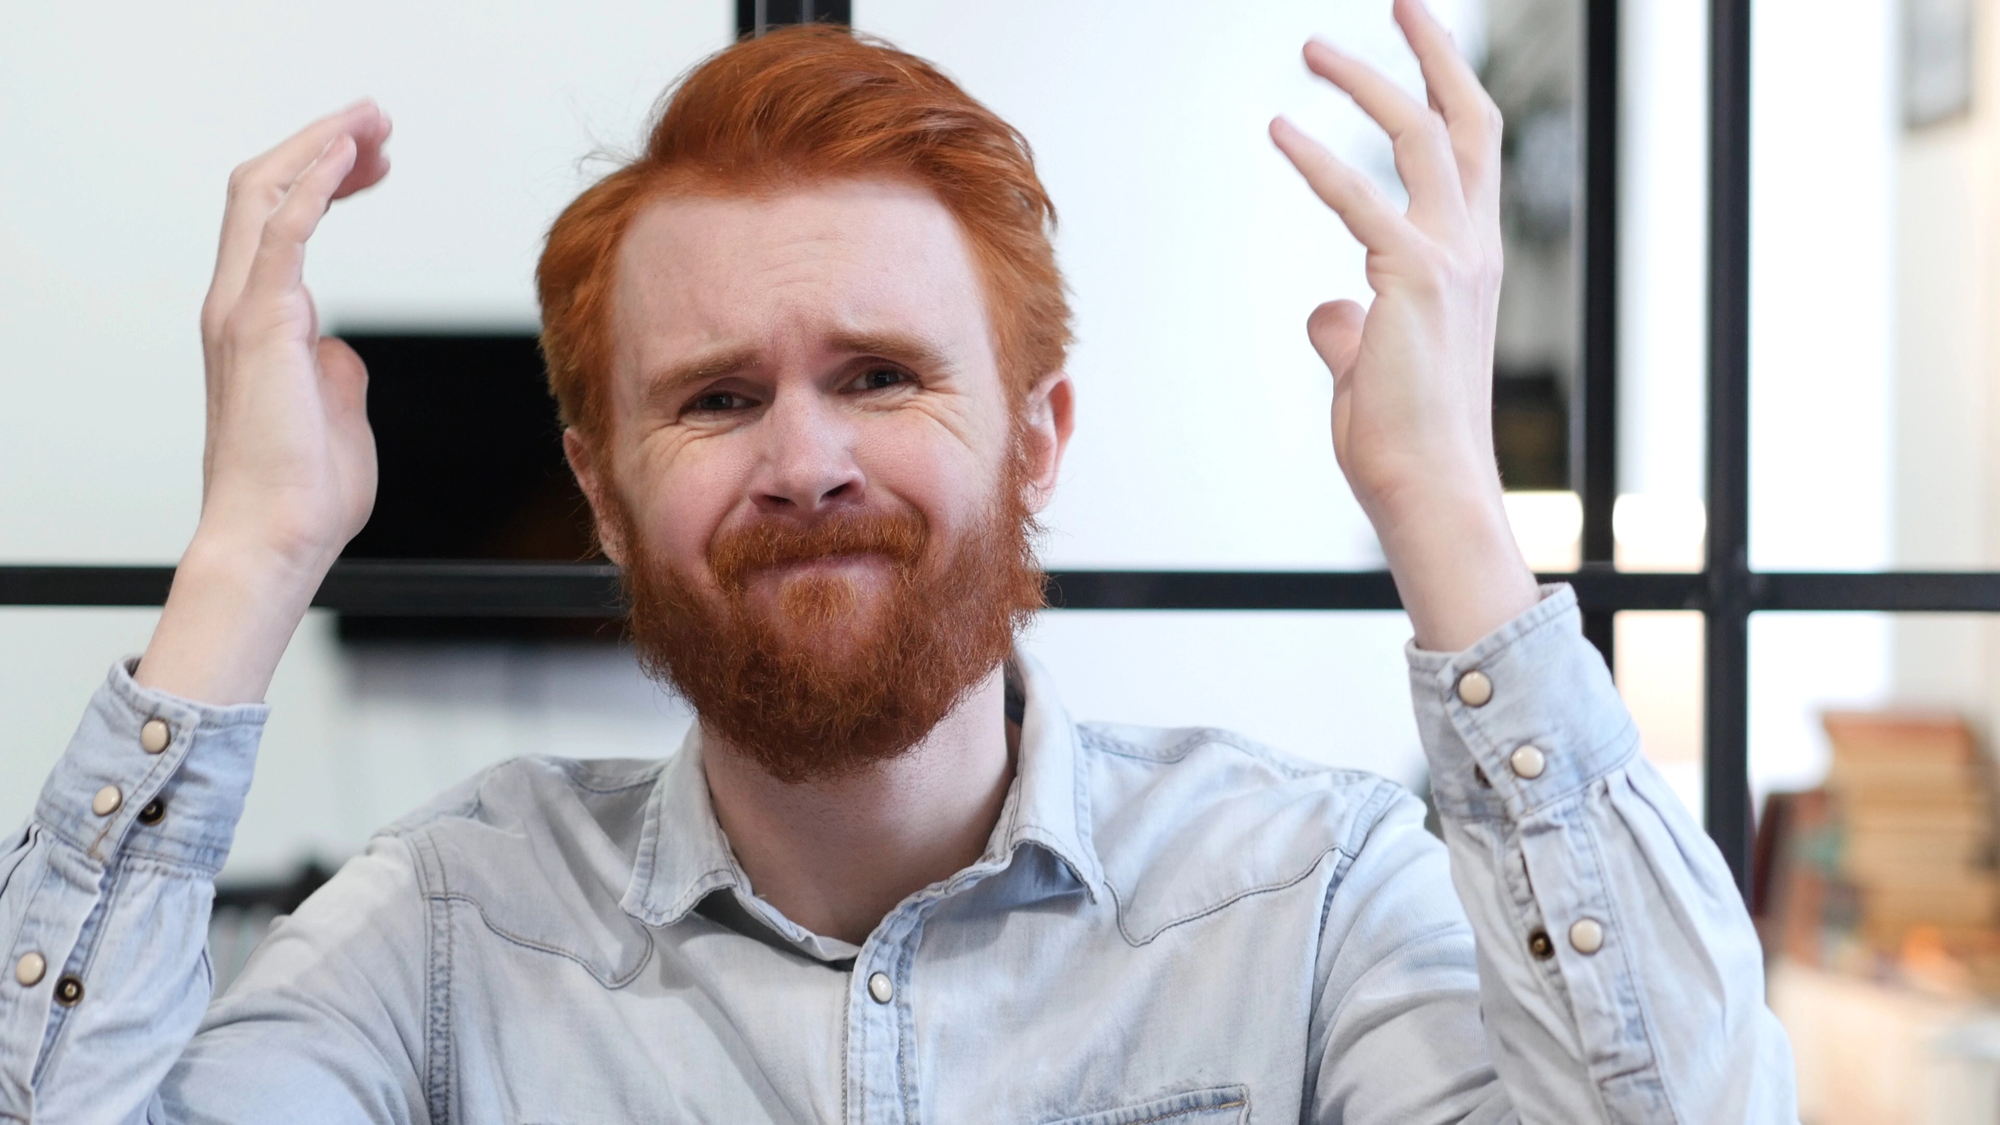 A person with red hair and a beard, wearing a light denim shirt, is sitting with a frustrated expression, raising both hands beside their head. The background shows a blurred indoor setting.